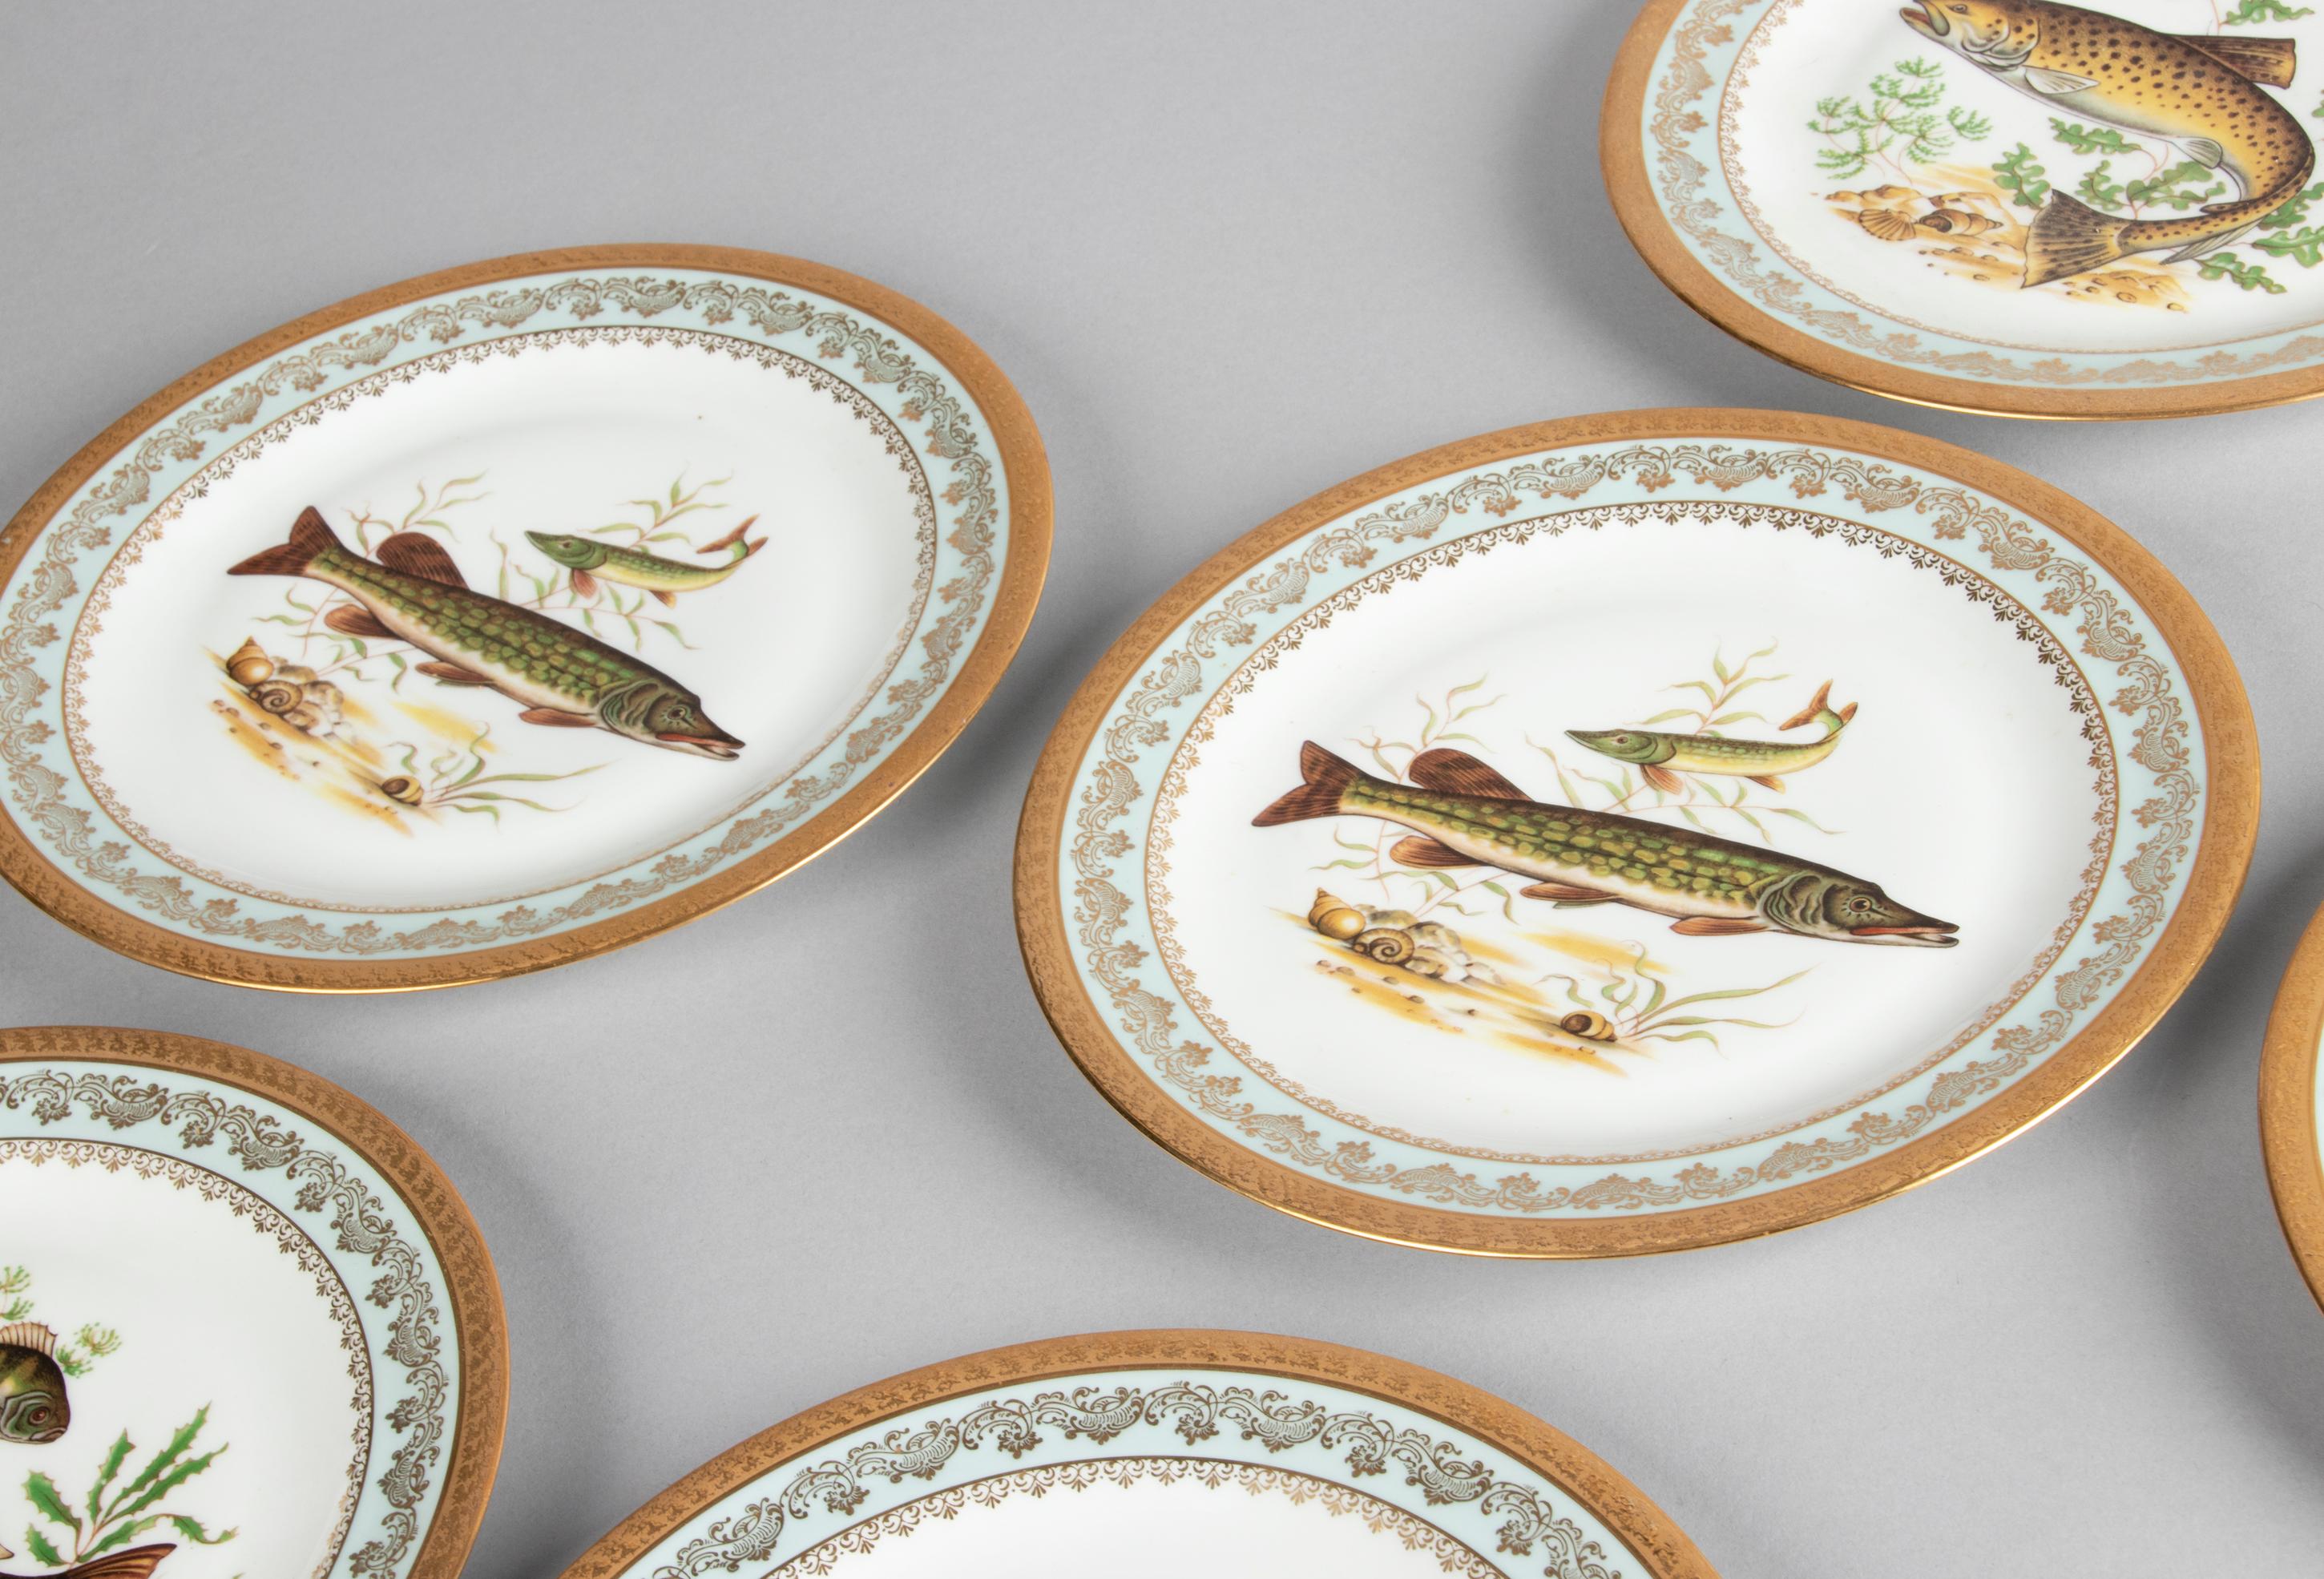 Porcelain Fish Service by Limoges Chadelaud with Gilt Encrusted Rims 3